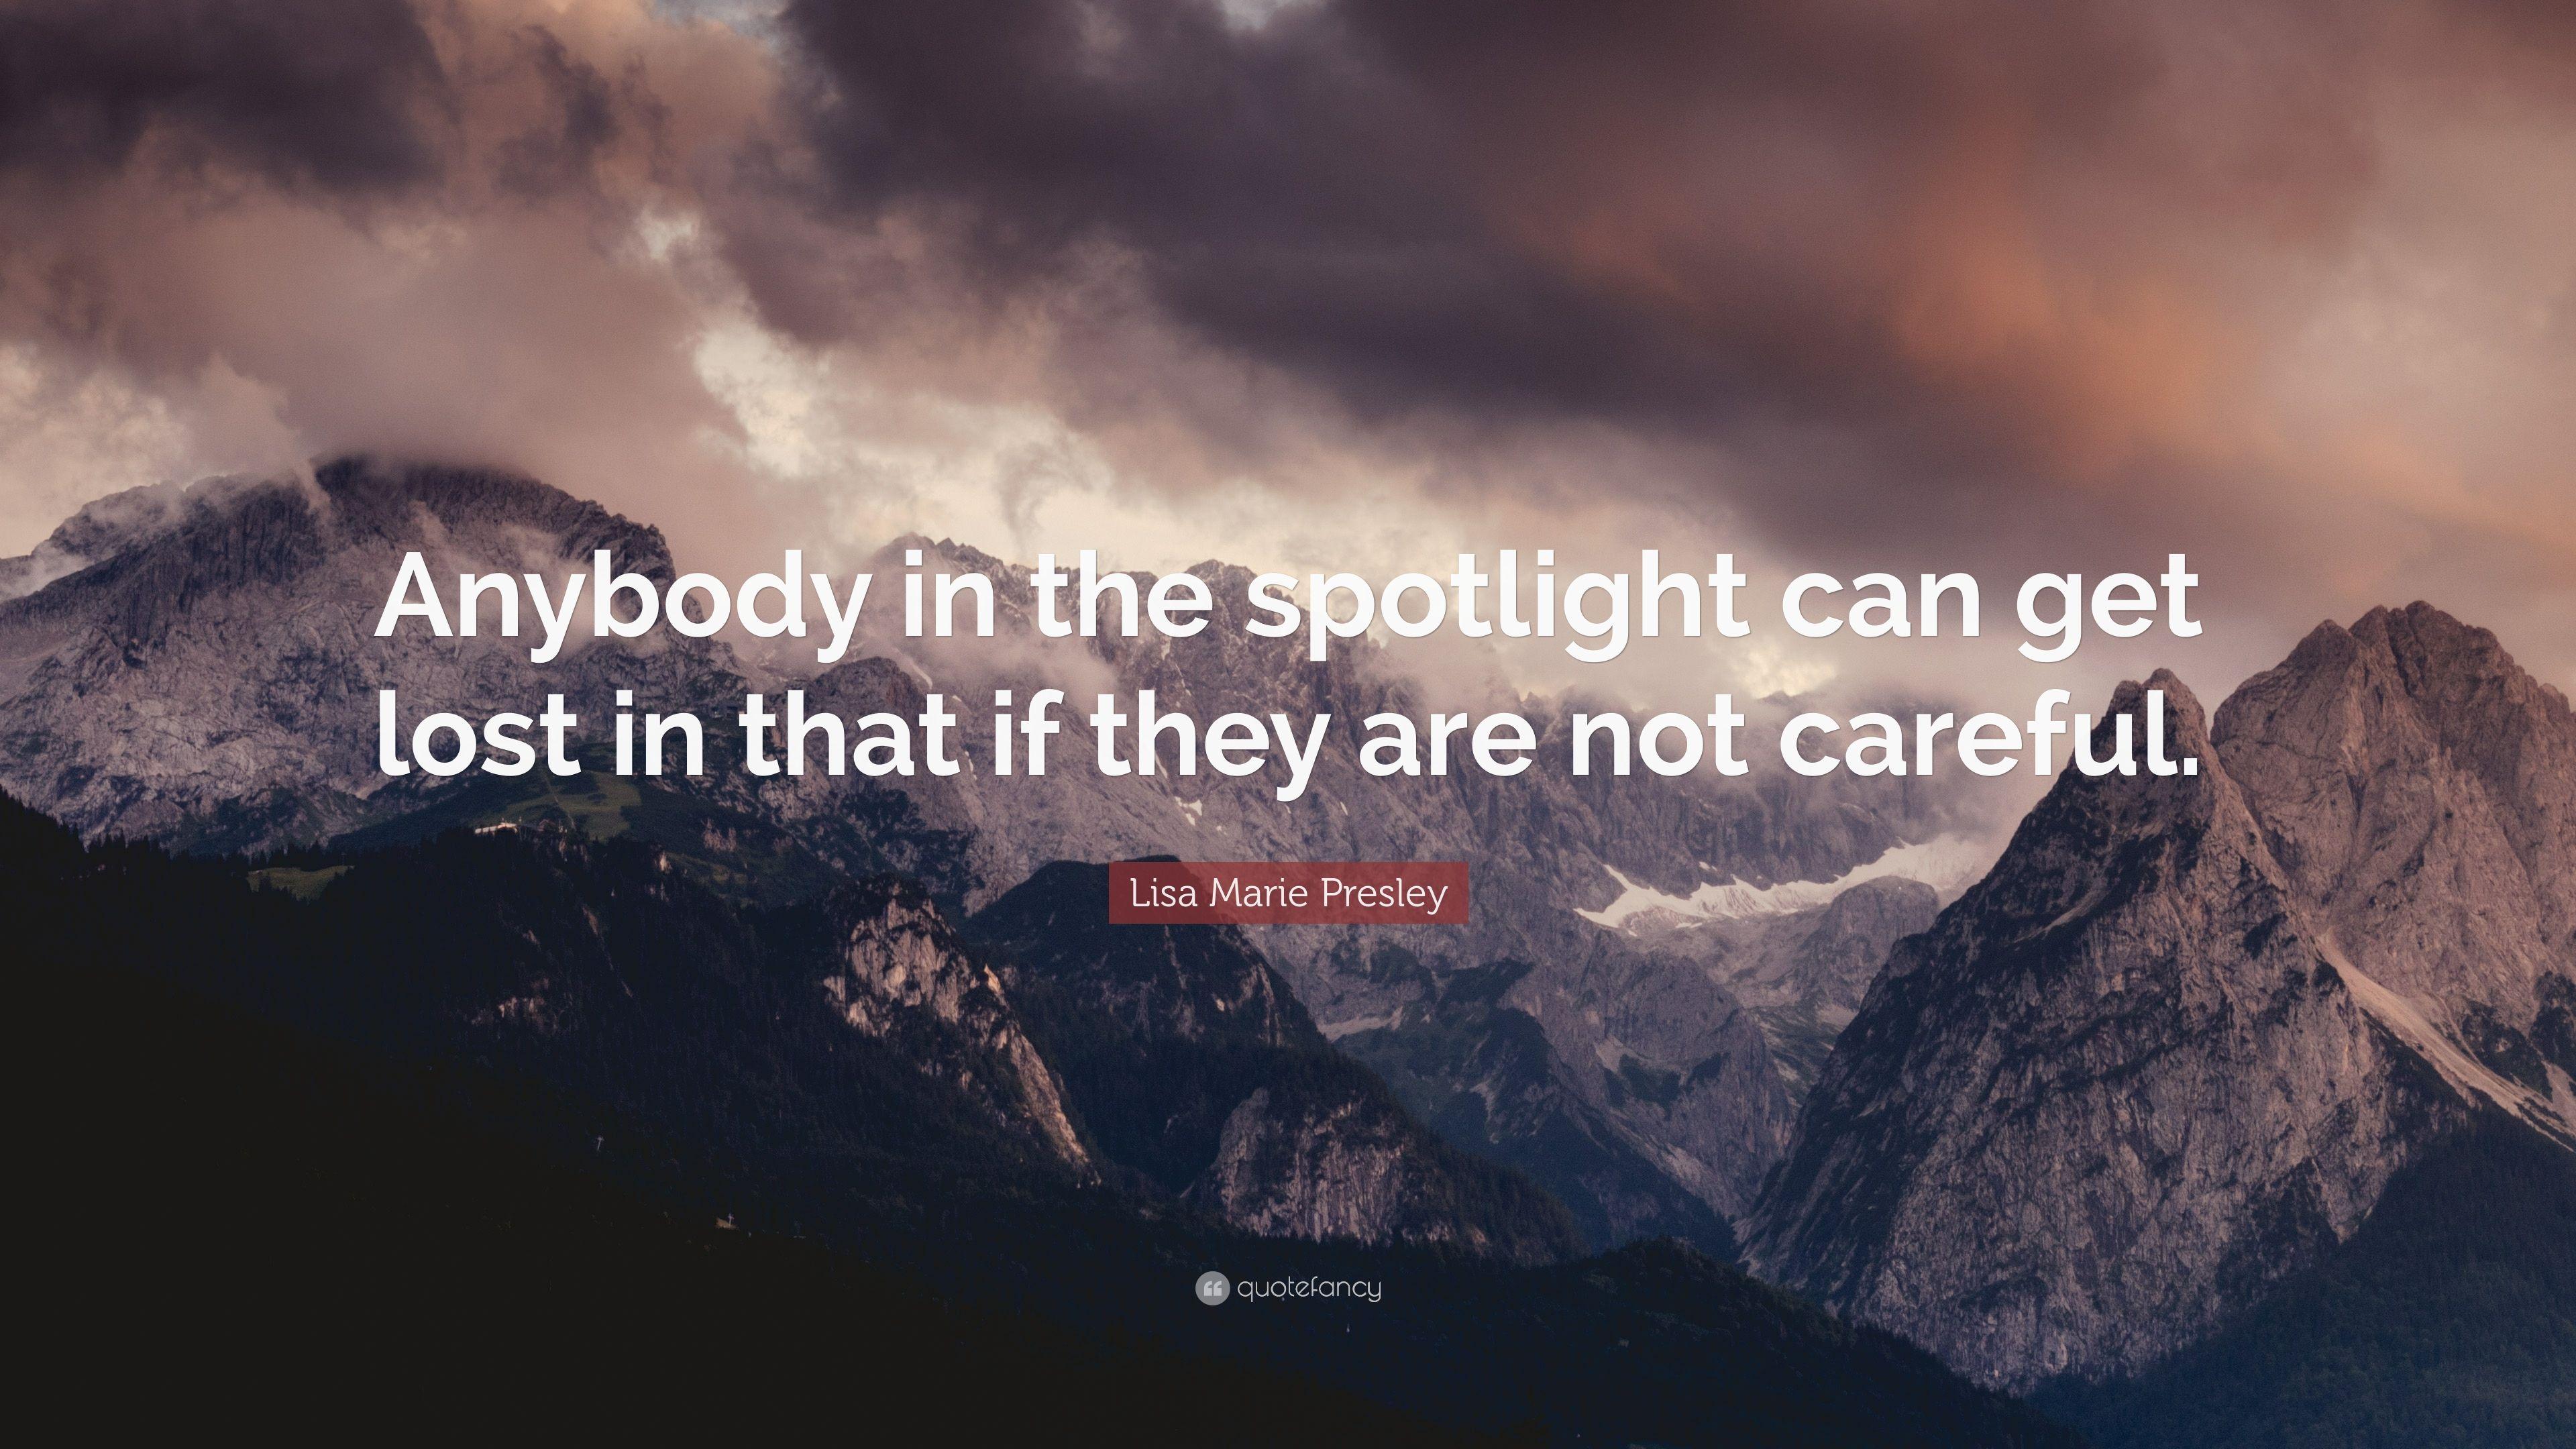 Lisa Marie Presley Quote: “Anybody in the spotlight can get lost